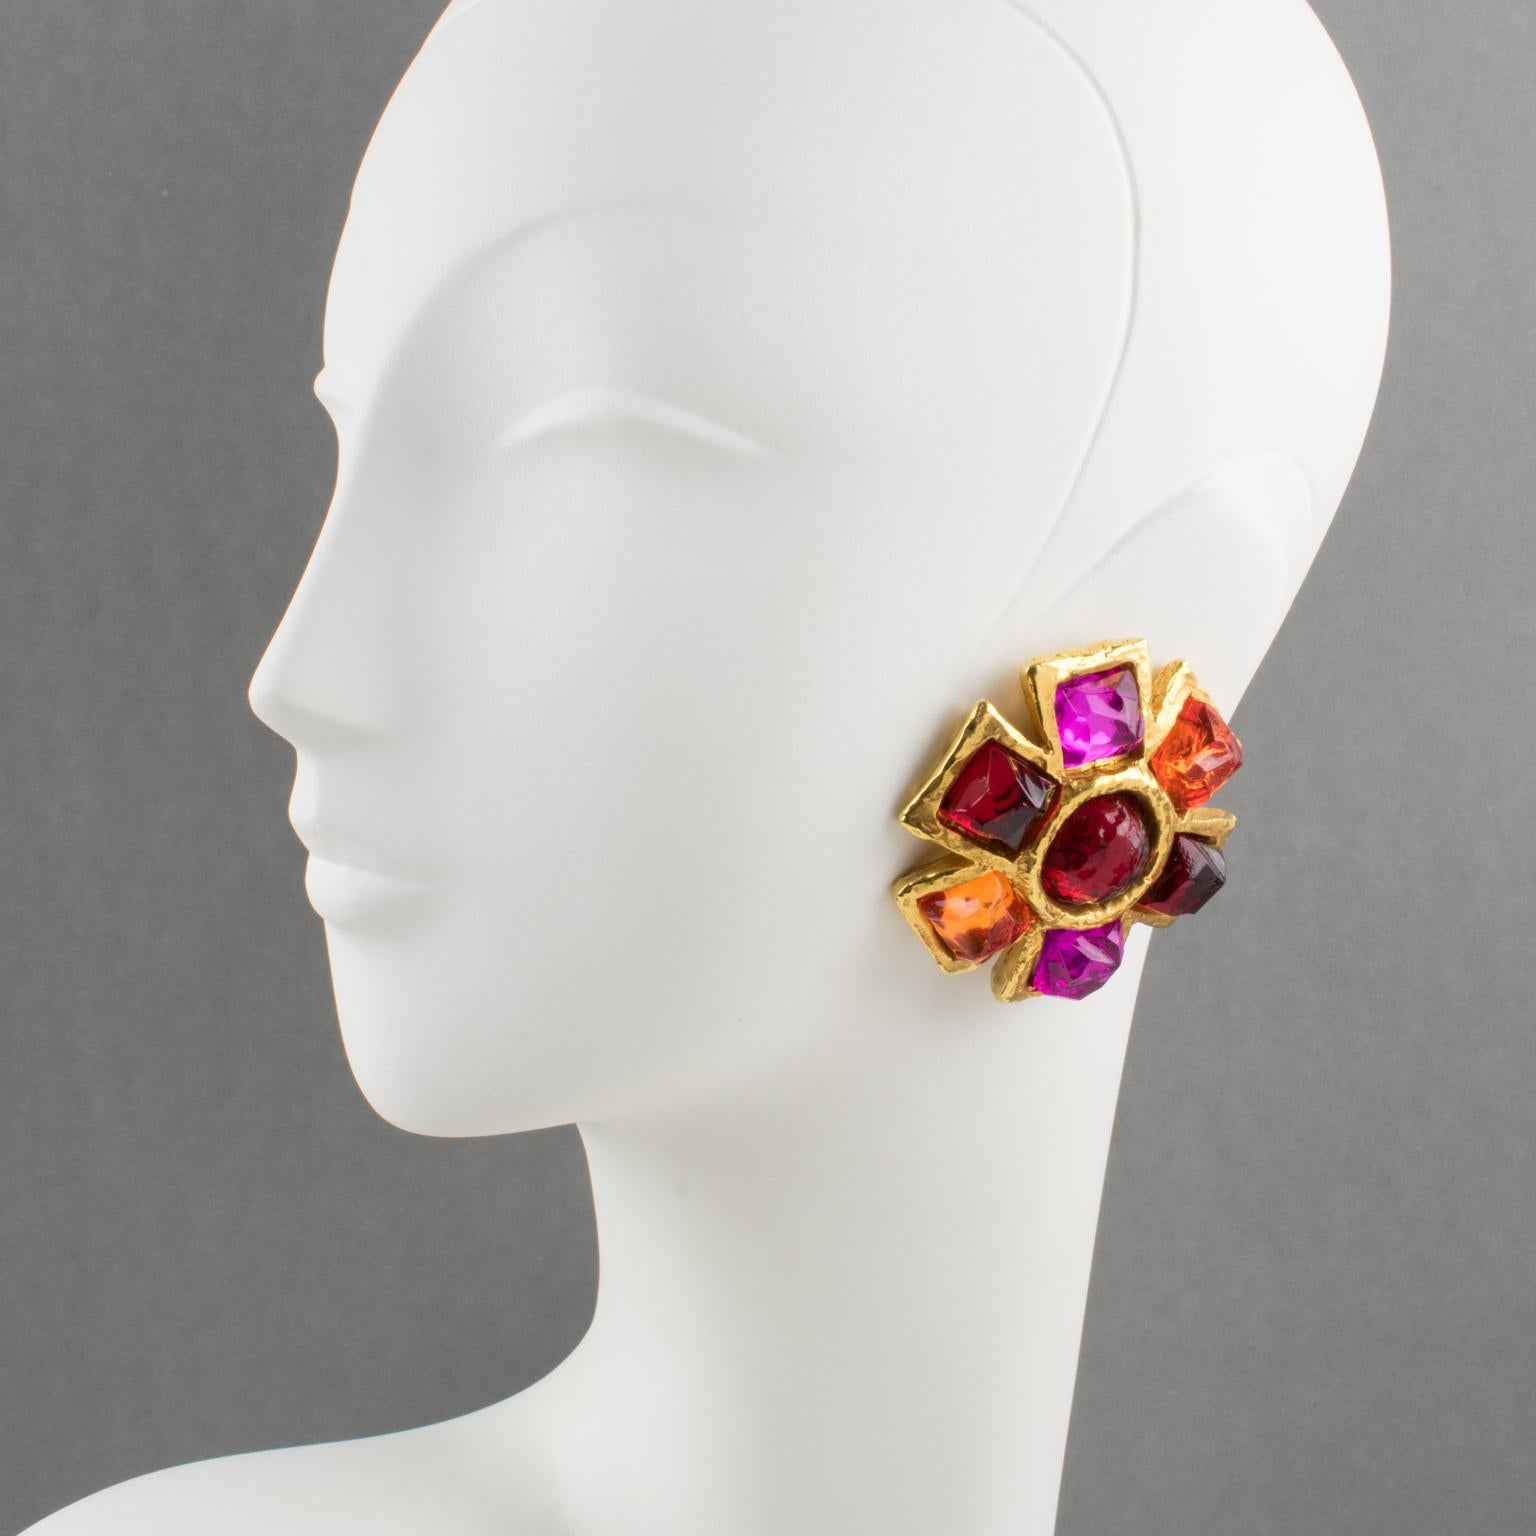 Exquisite Alexis Lahellec Paris signed clip-on earrings. A couture piece from that famous French Jewelry designer, featuring star-shaped gilt metal-coated resin elements topped with colorful resin cabochons. Assorted tones of ruby red, fuchsia pink,